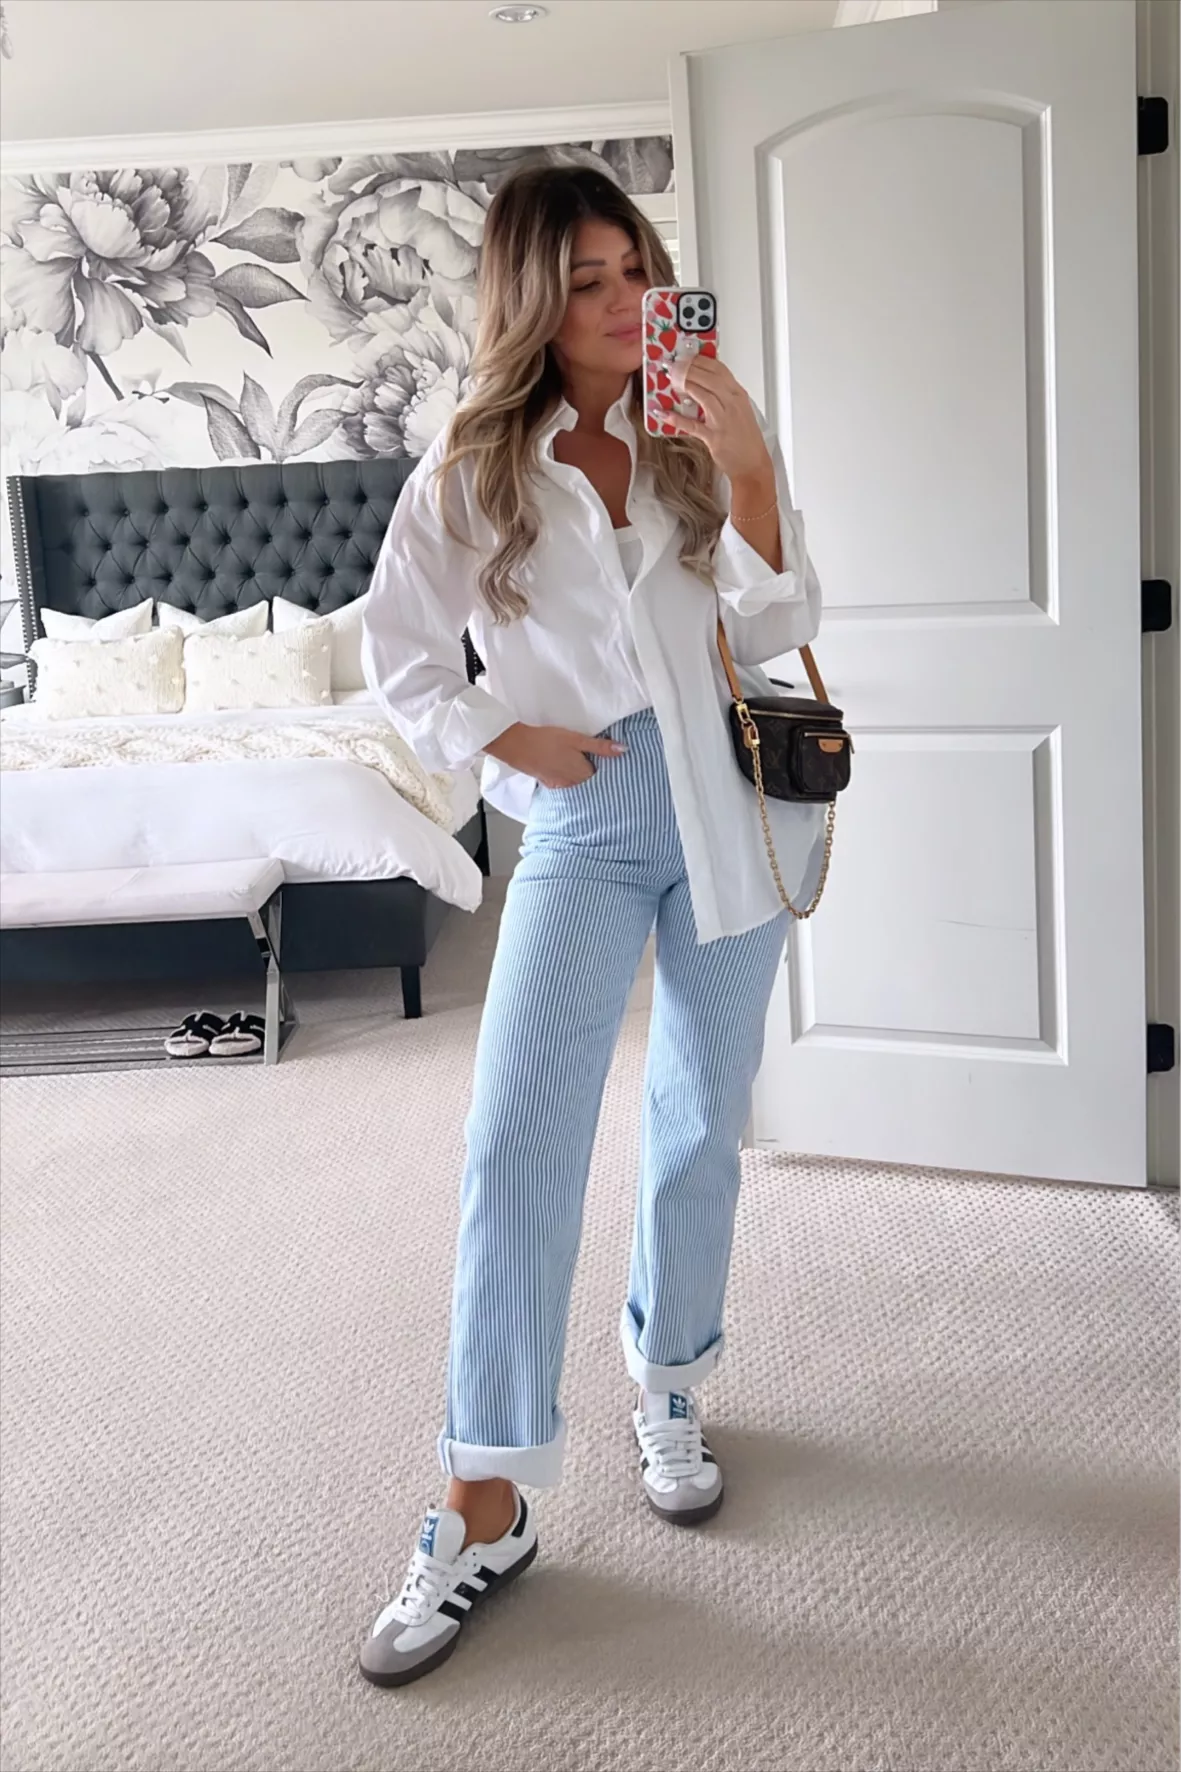 White Leggings Relaxed Spring Outfits (4 ideas & outfits)